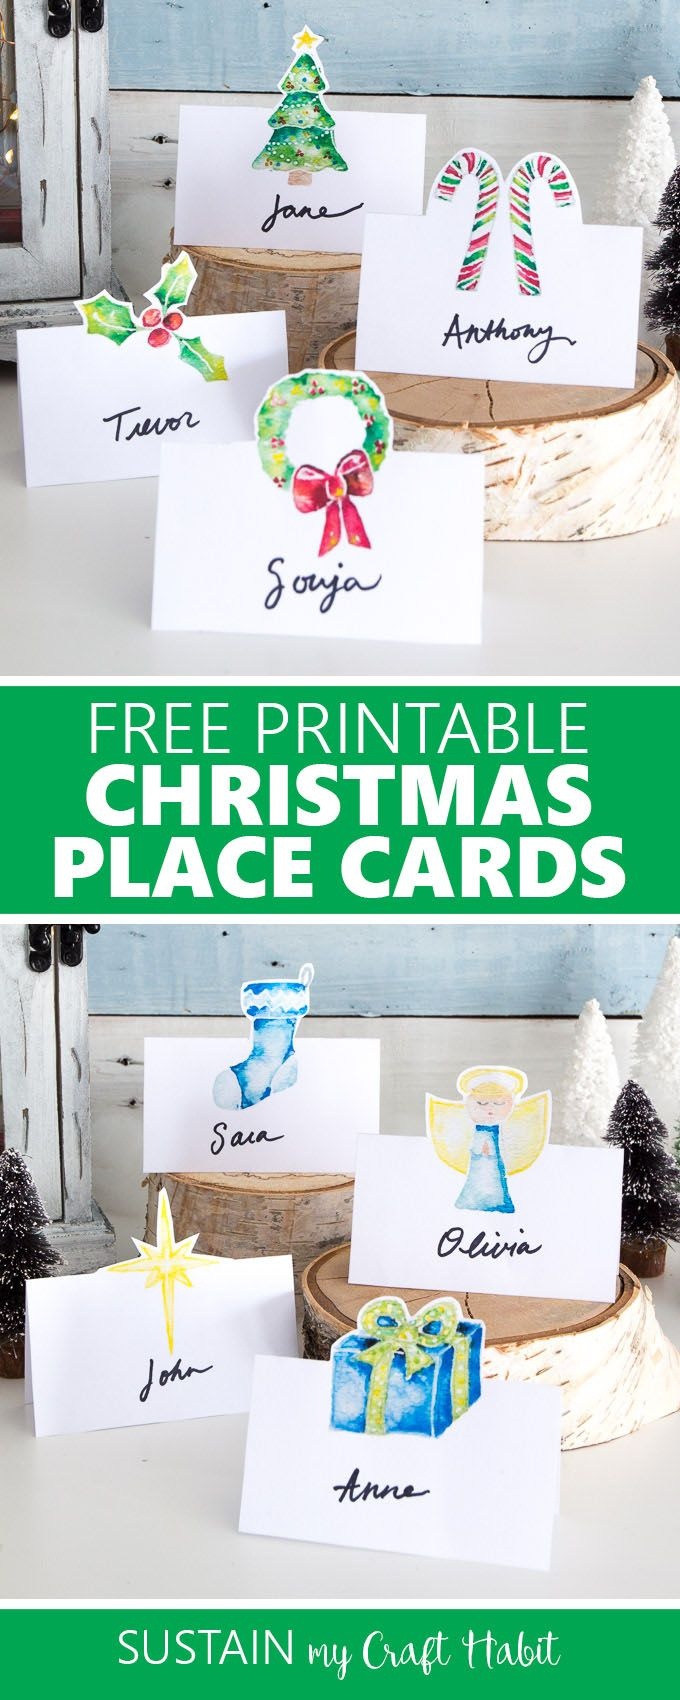 Watercolor Christmas Place Cards Printable | ☆ Diy ☆ | Christmas - Christmas Table Name Cards Free Printable